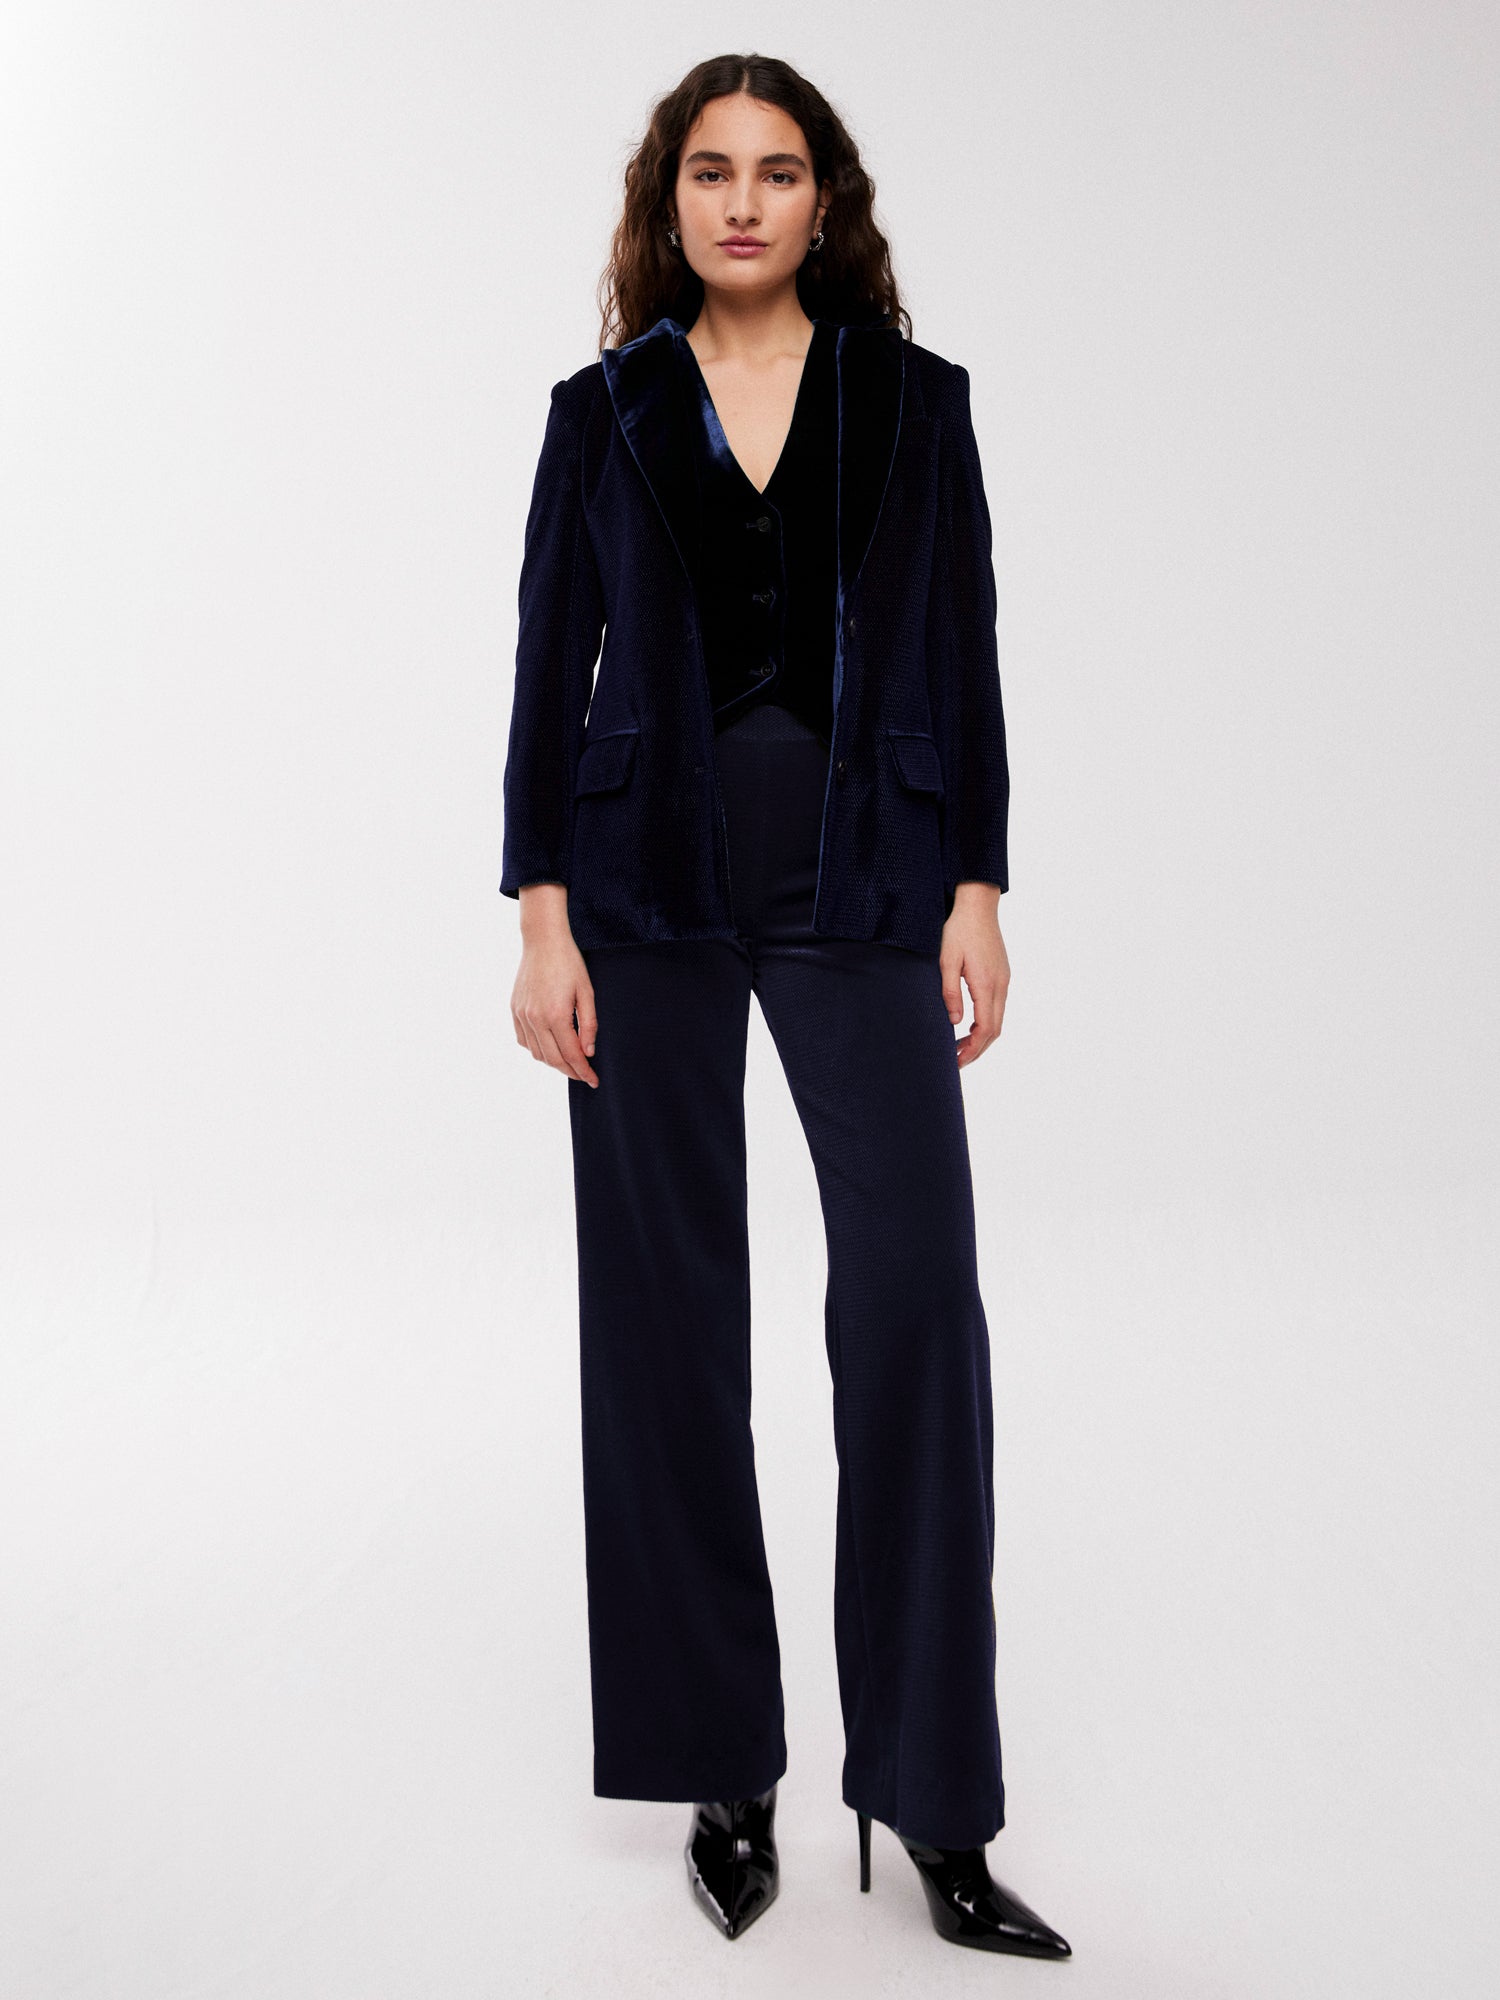 mioh  MICHAEL BLUE - Blue velvet trouser suit for guest, party and daily –  MIOH